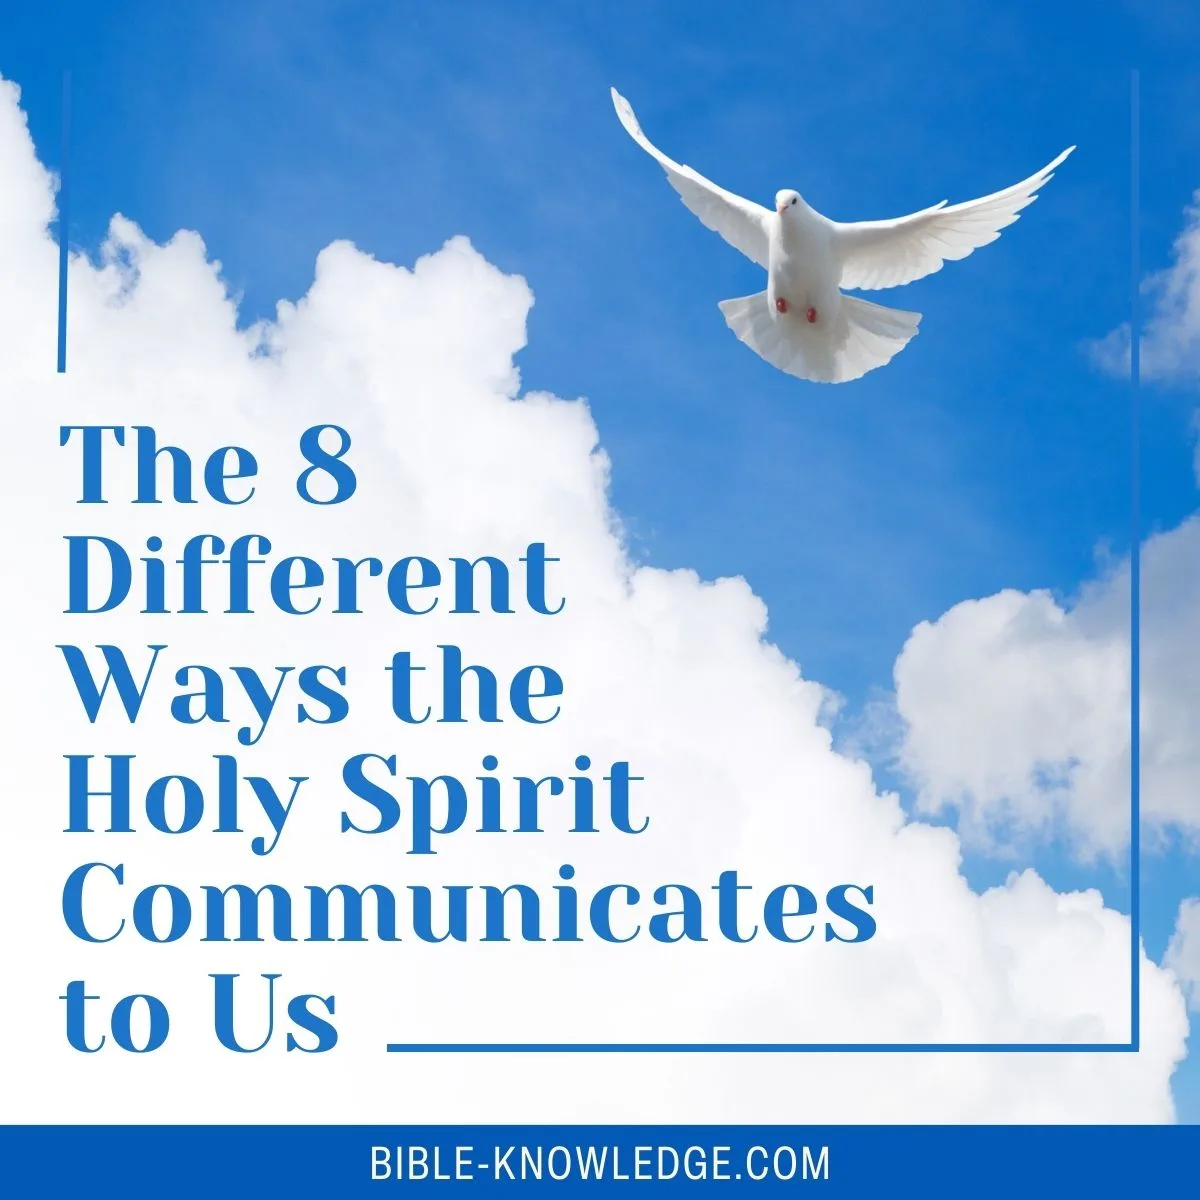 people filled with the holy spirit